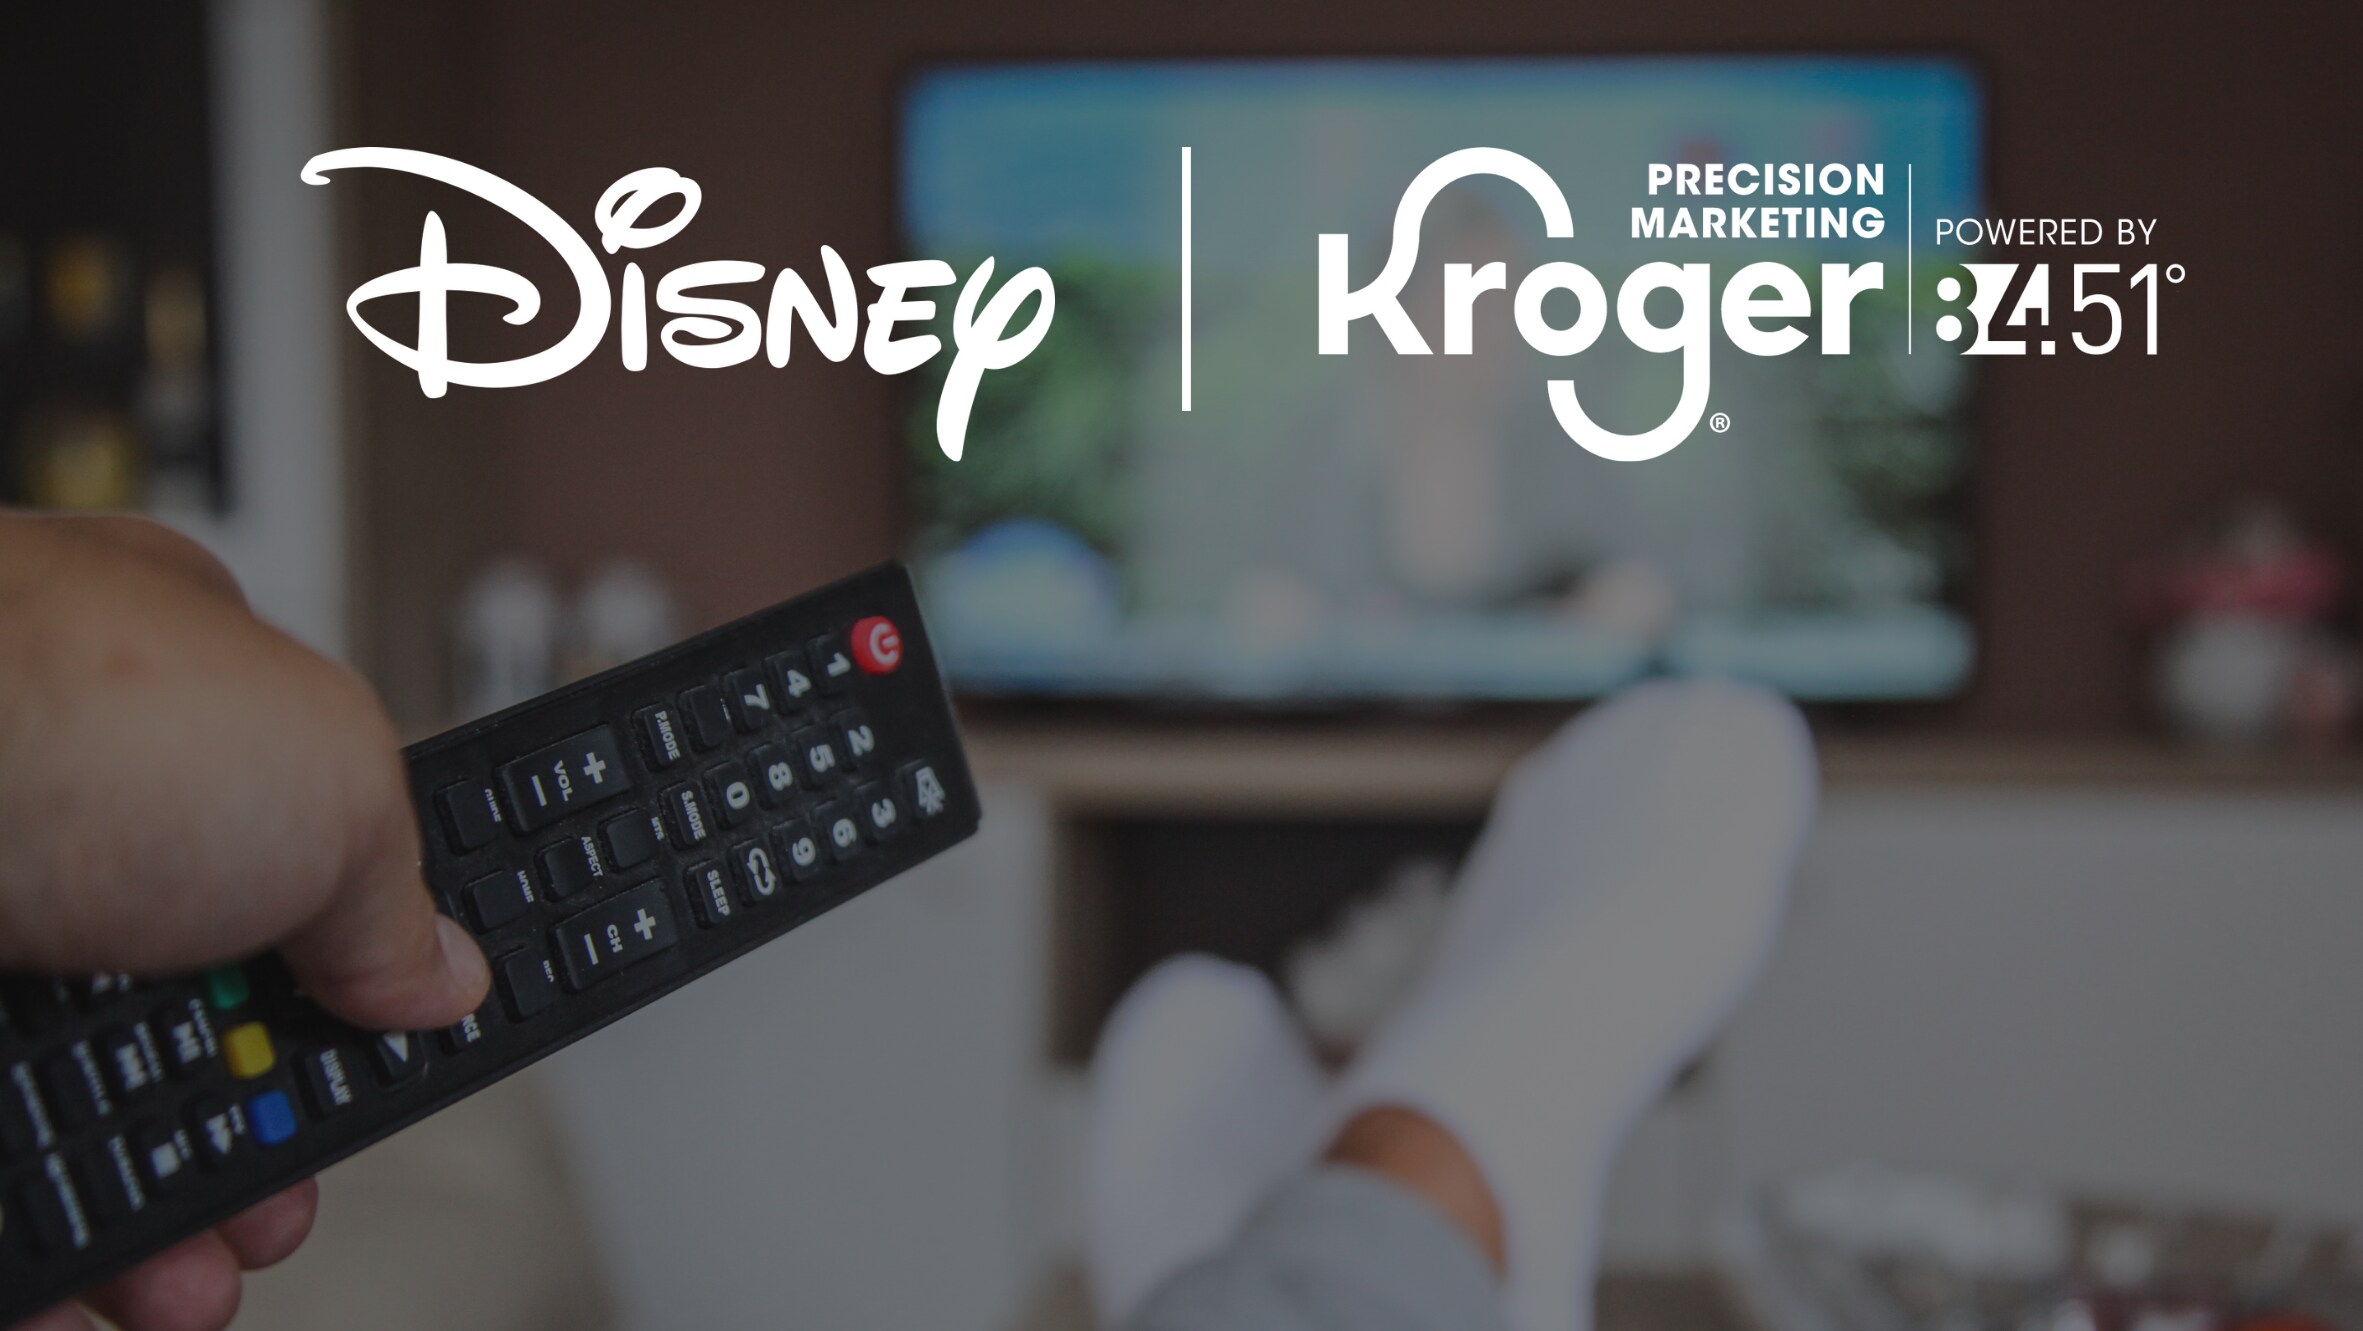 Disney and Kroger Precision Marketing Connect Retail Media Insights To Premium Content In Streaming TV